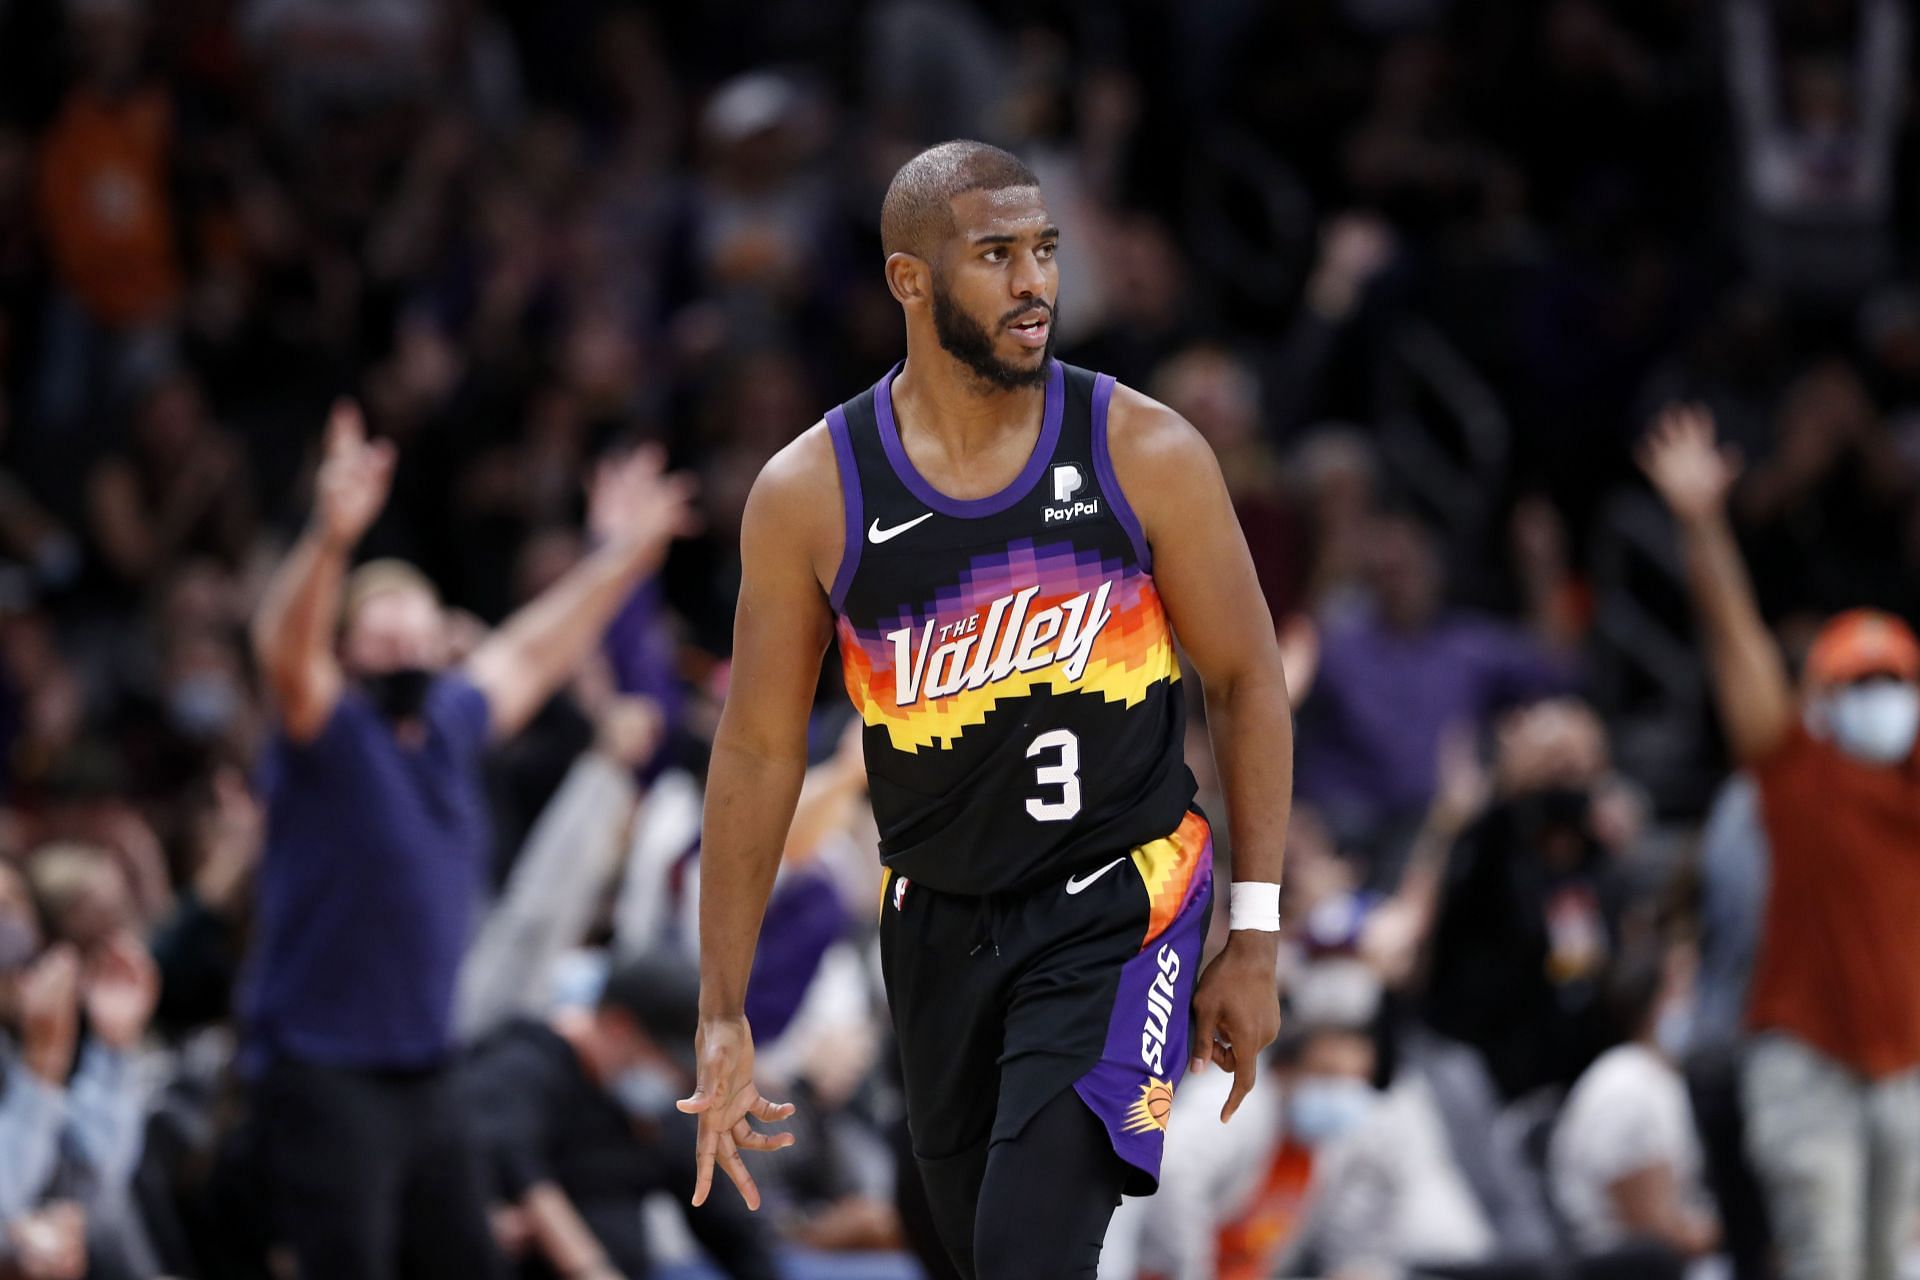 Chris Paul #3 of the Phoenix Suns reacts after making a three point basket during the second half against the Los Angeles Clippers at Footprint Center on February 15, 2022 in Phoenix, Arizona.